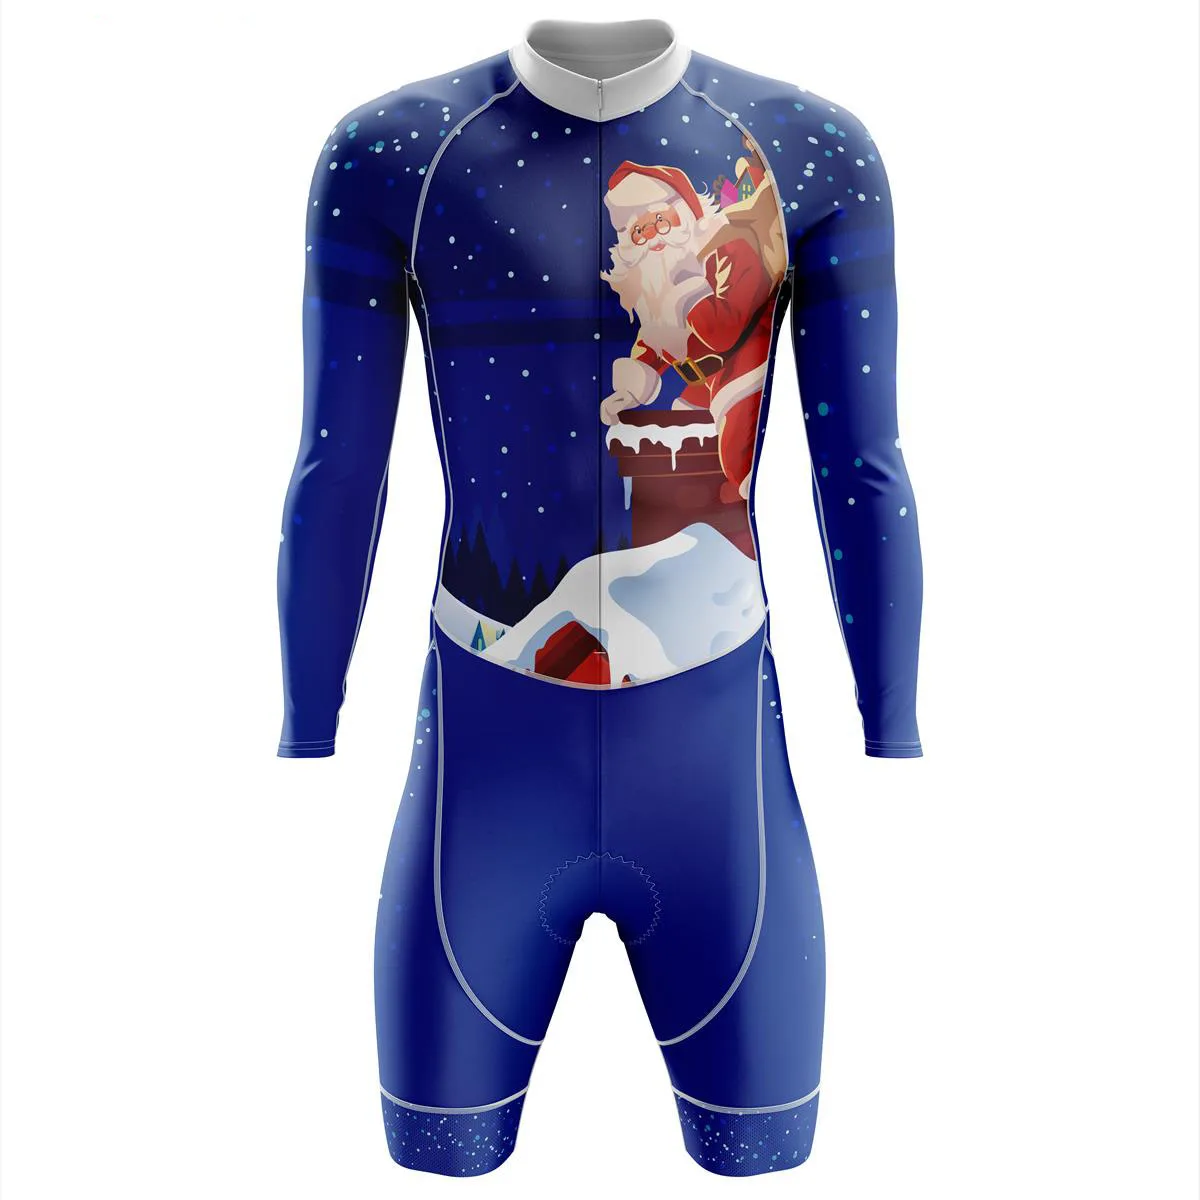 Men Triathlon Tri Suit Padded Compression Running Swimming Cycling Skinsuit Blue 